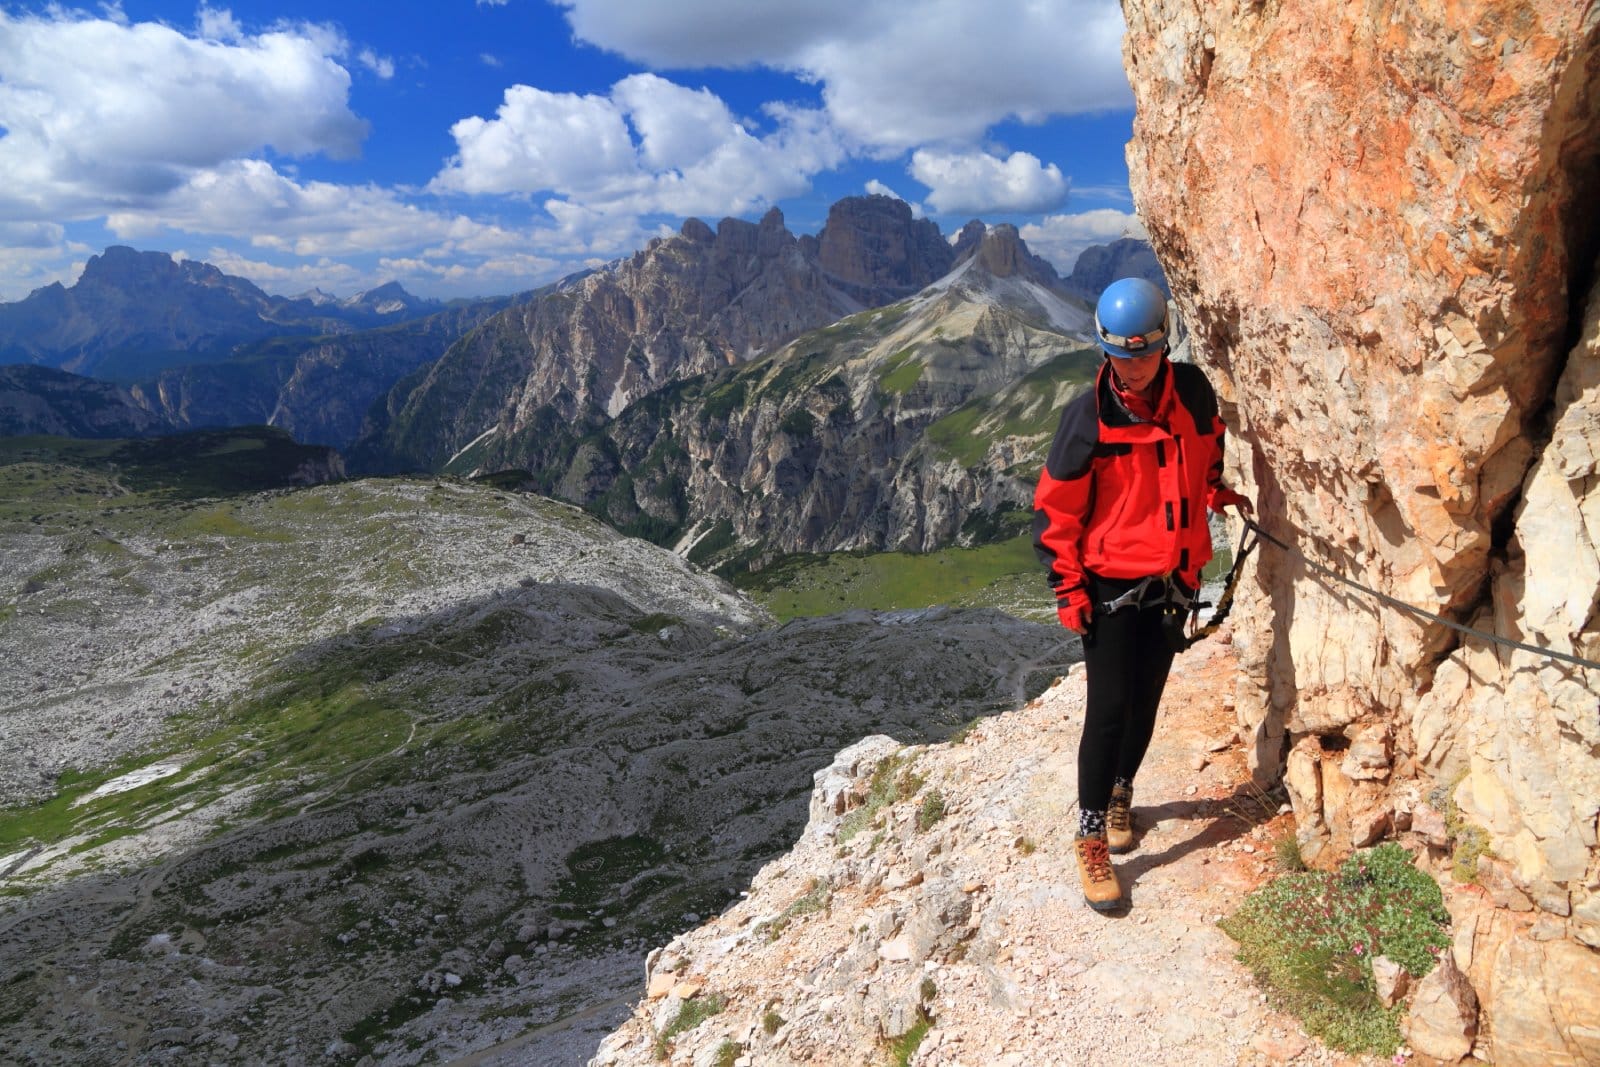 <p class="wp-caption-text">Image Credit: Shutterstock / Inu</p>  <p><span>The Dolomites are the birthplace of the via ferrata, protected climbing routes that offer a unique way to experience the mountains. These routes, equipped with steel cables, ladders, and bridges, allow adventurers to tackle dramatic cliffs and peaks without the need for technical climbing skills. The Dolomites boast some of the most scenic and historically significant via ferratas, offering breathtaking views and a thrilling experience.</span></p>